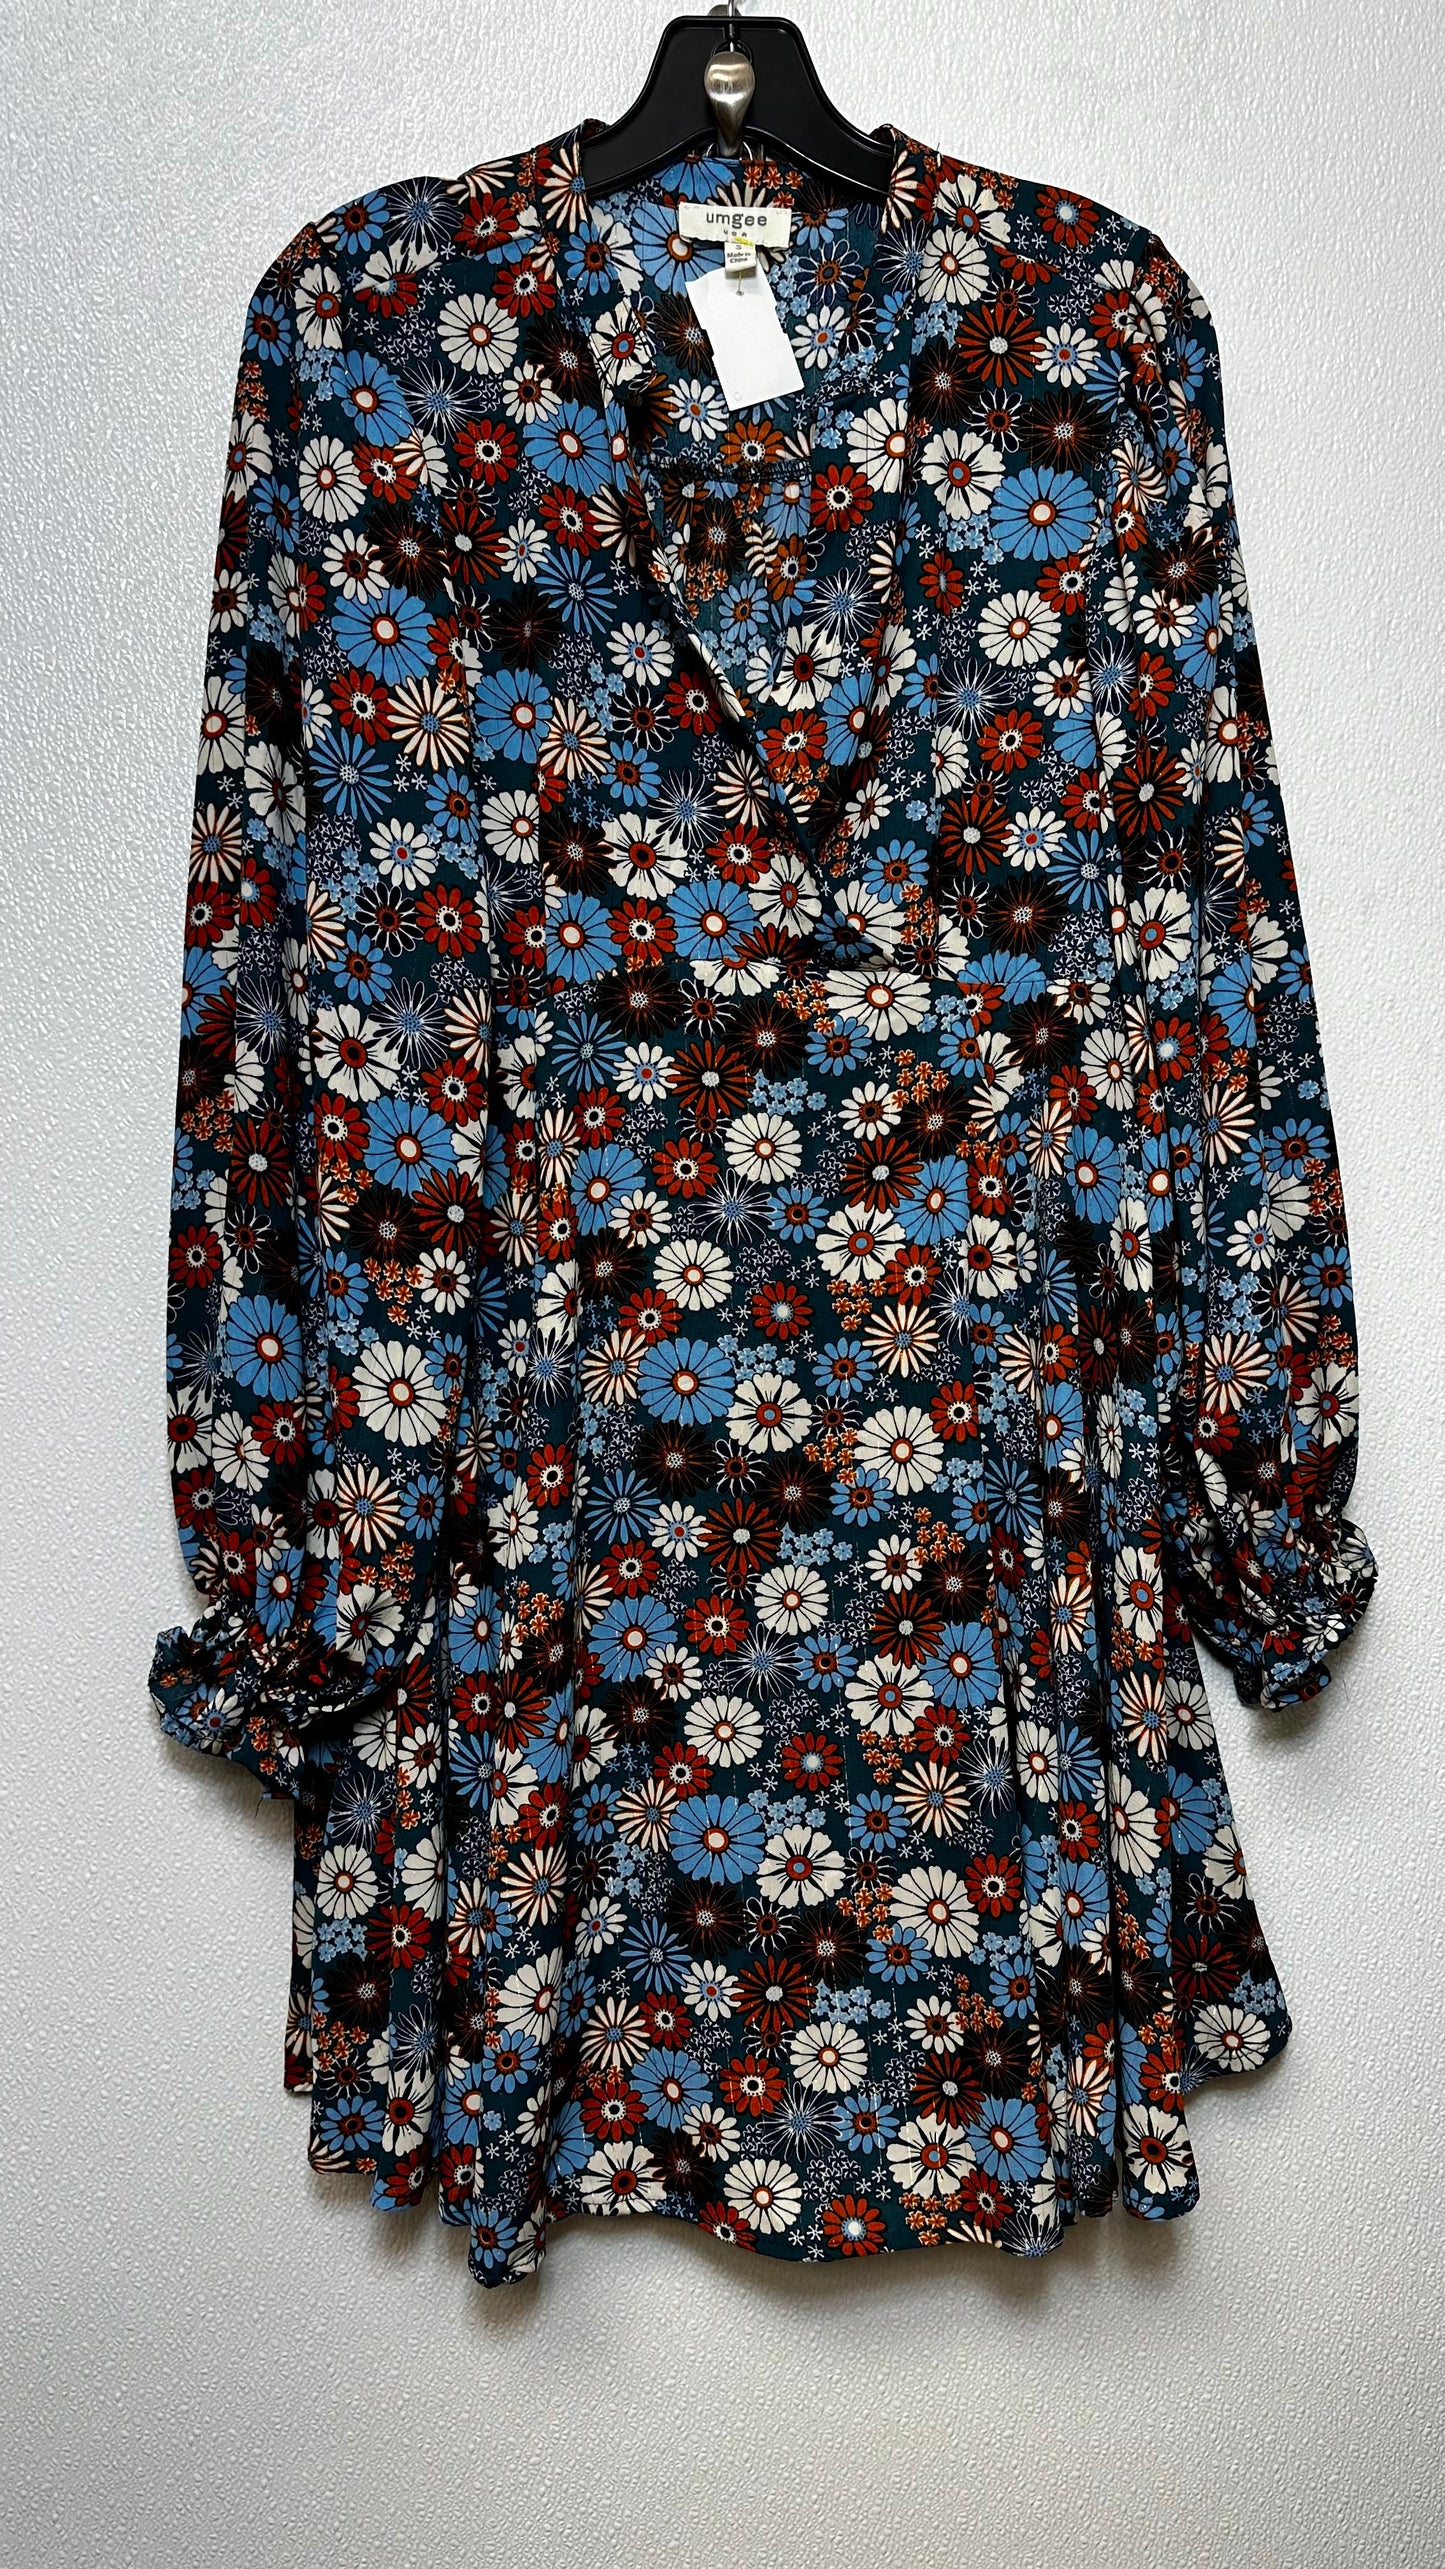 Floral Dress Casual Short Umgee, Size S